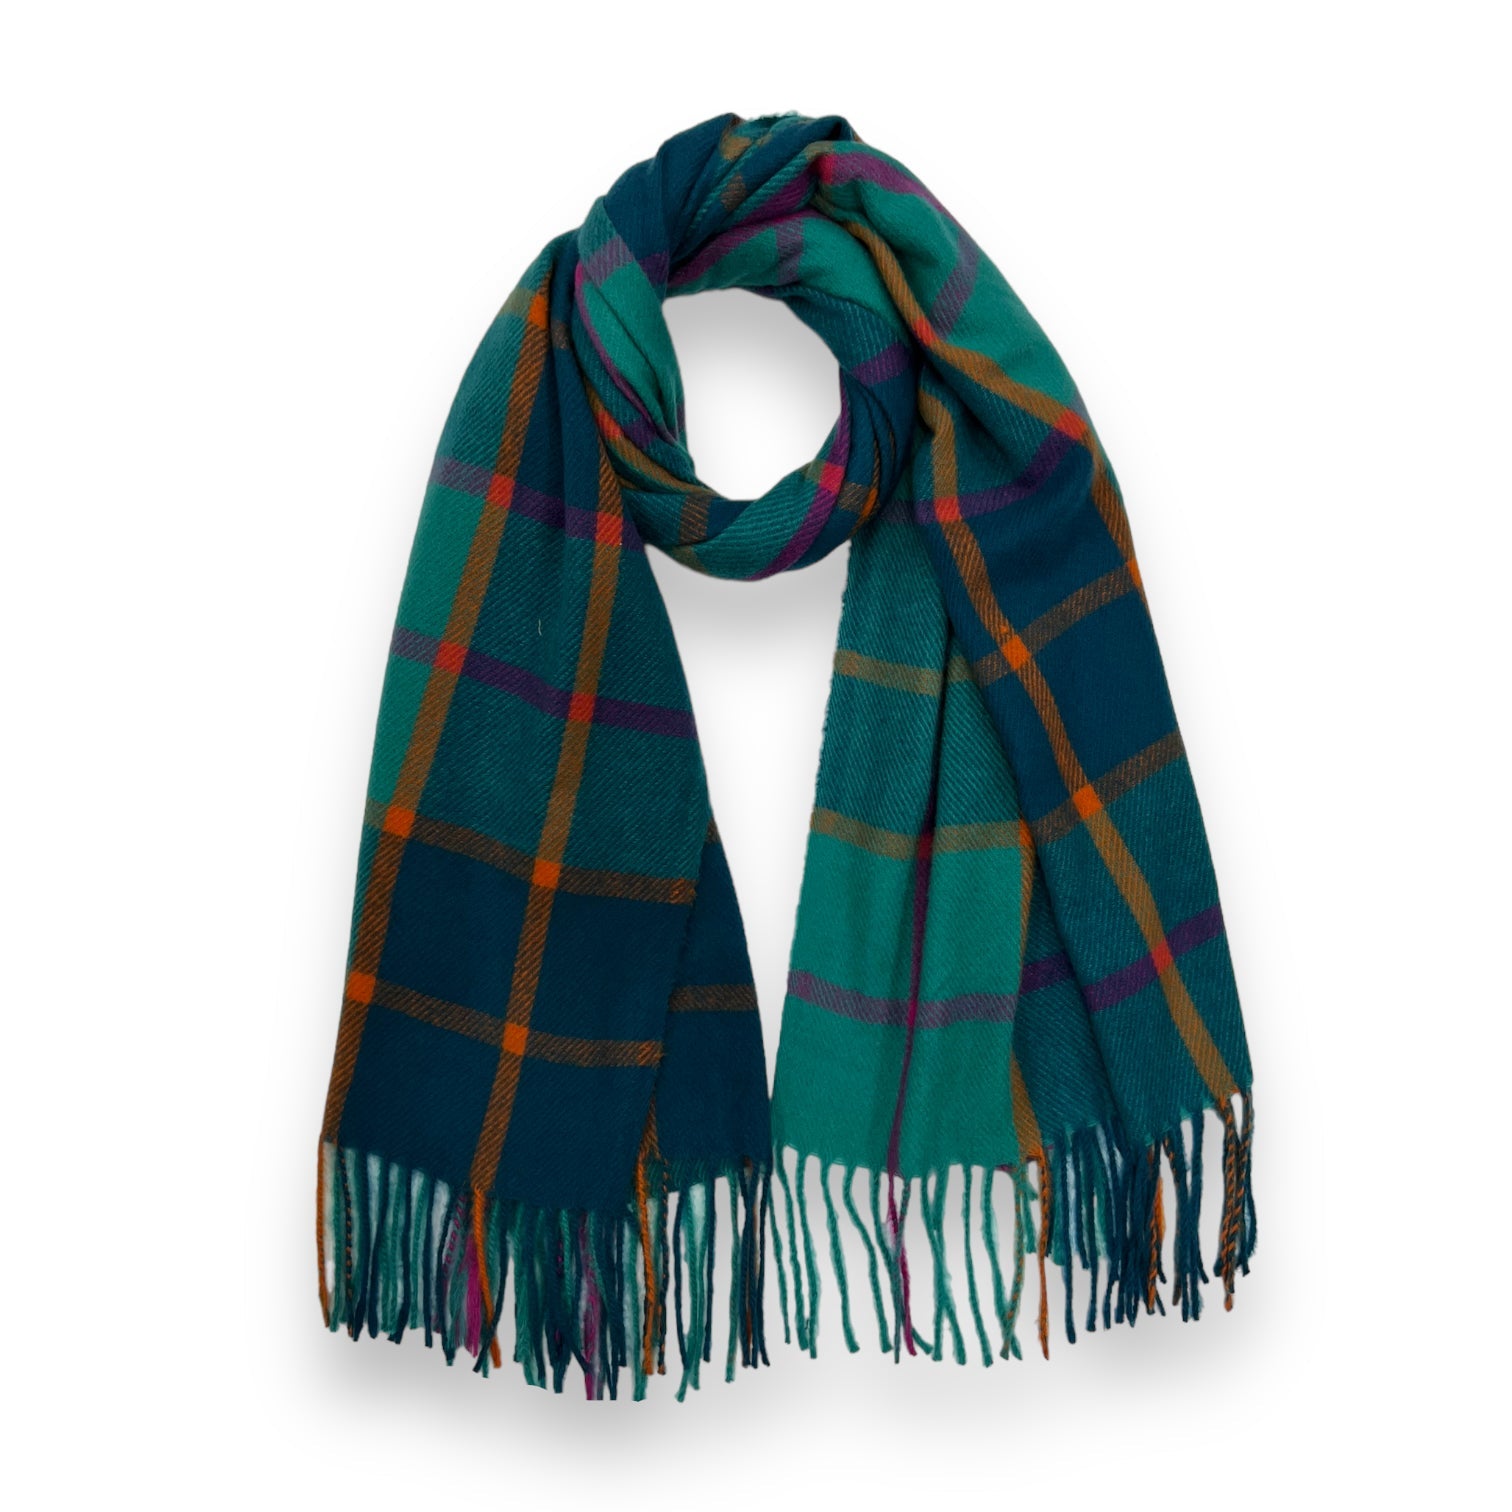 Festive check scarf in multi colours finished with tassels